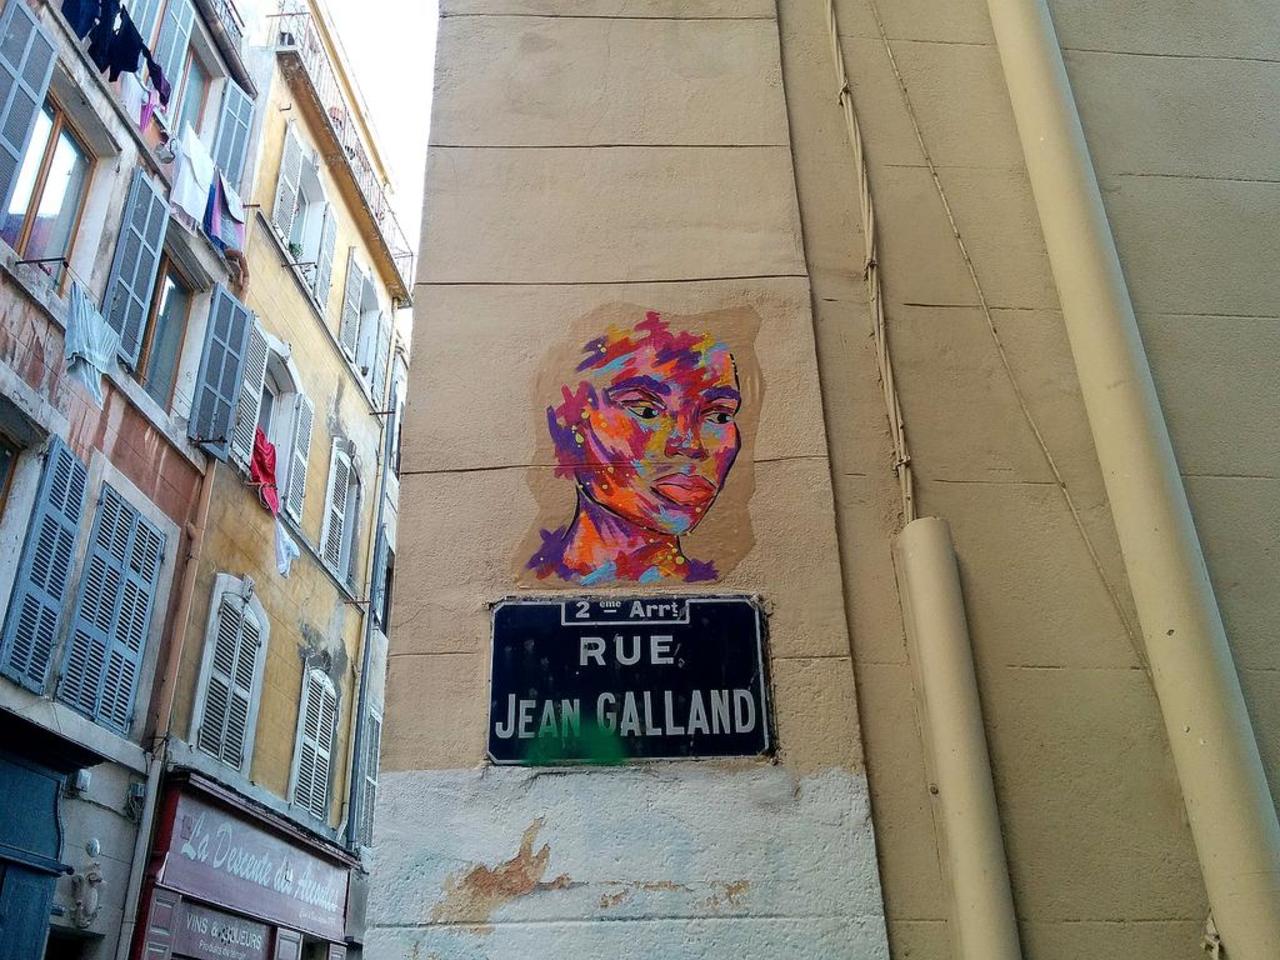 Street Art by anonymous in #Marseille http://www.urbacolors.com #art #mural #graffiti #streetart http://t.co/mkoUL2Nluc